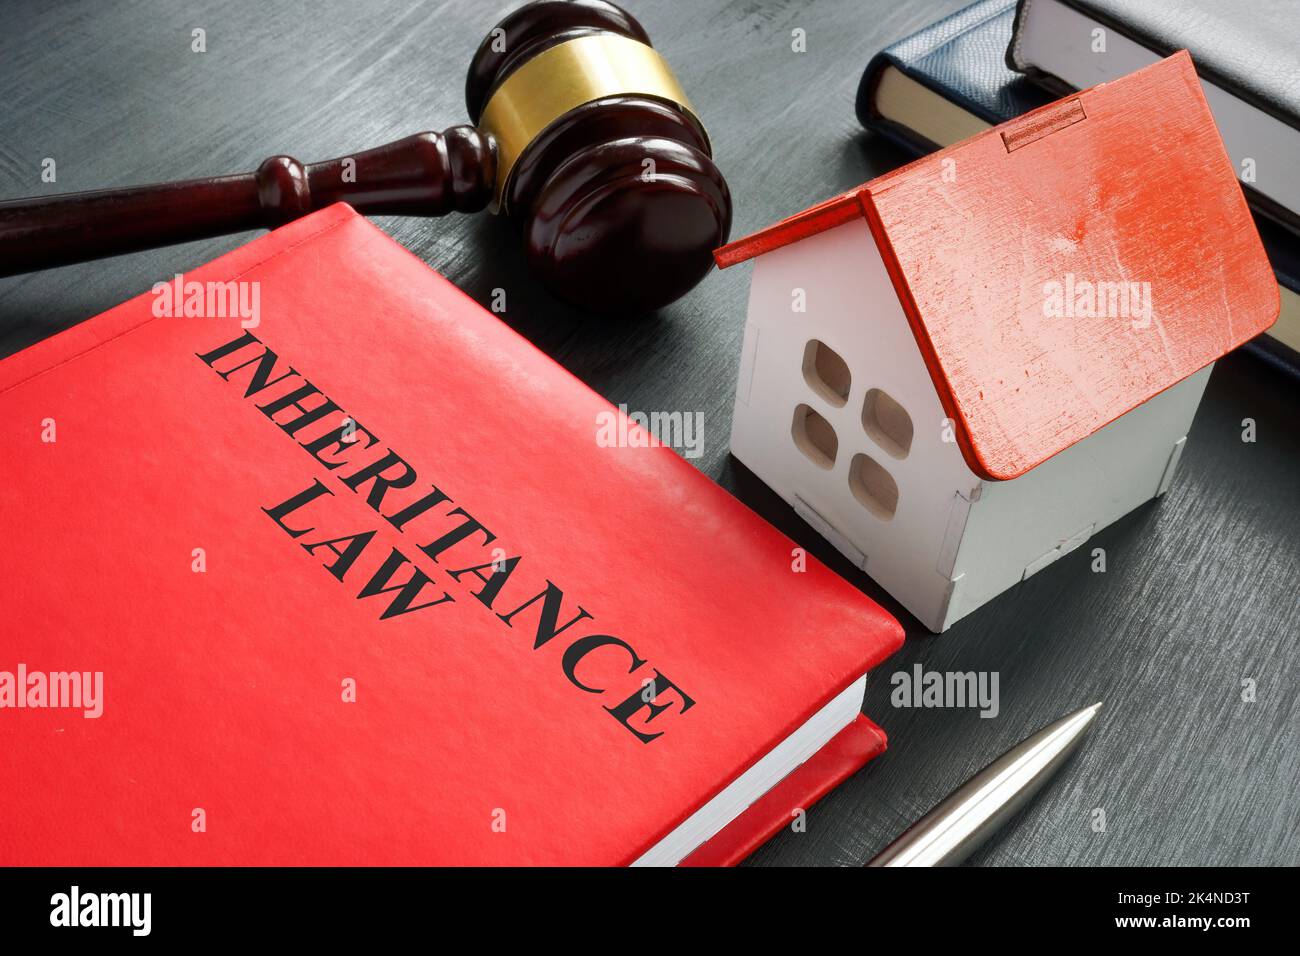 Inheritance law book, model of house and gavel. Stock Photo